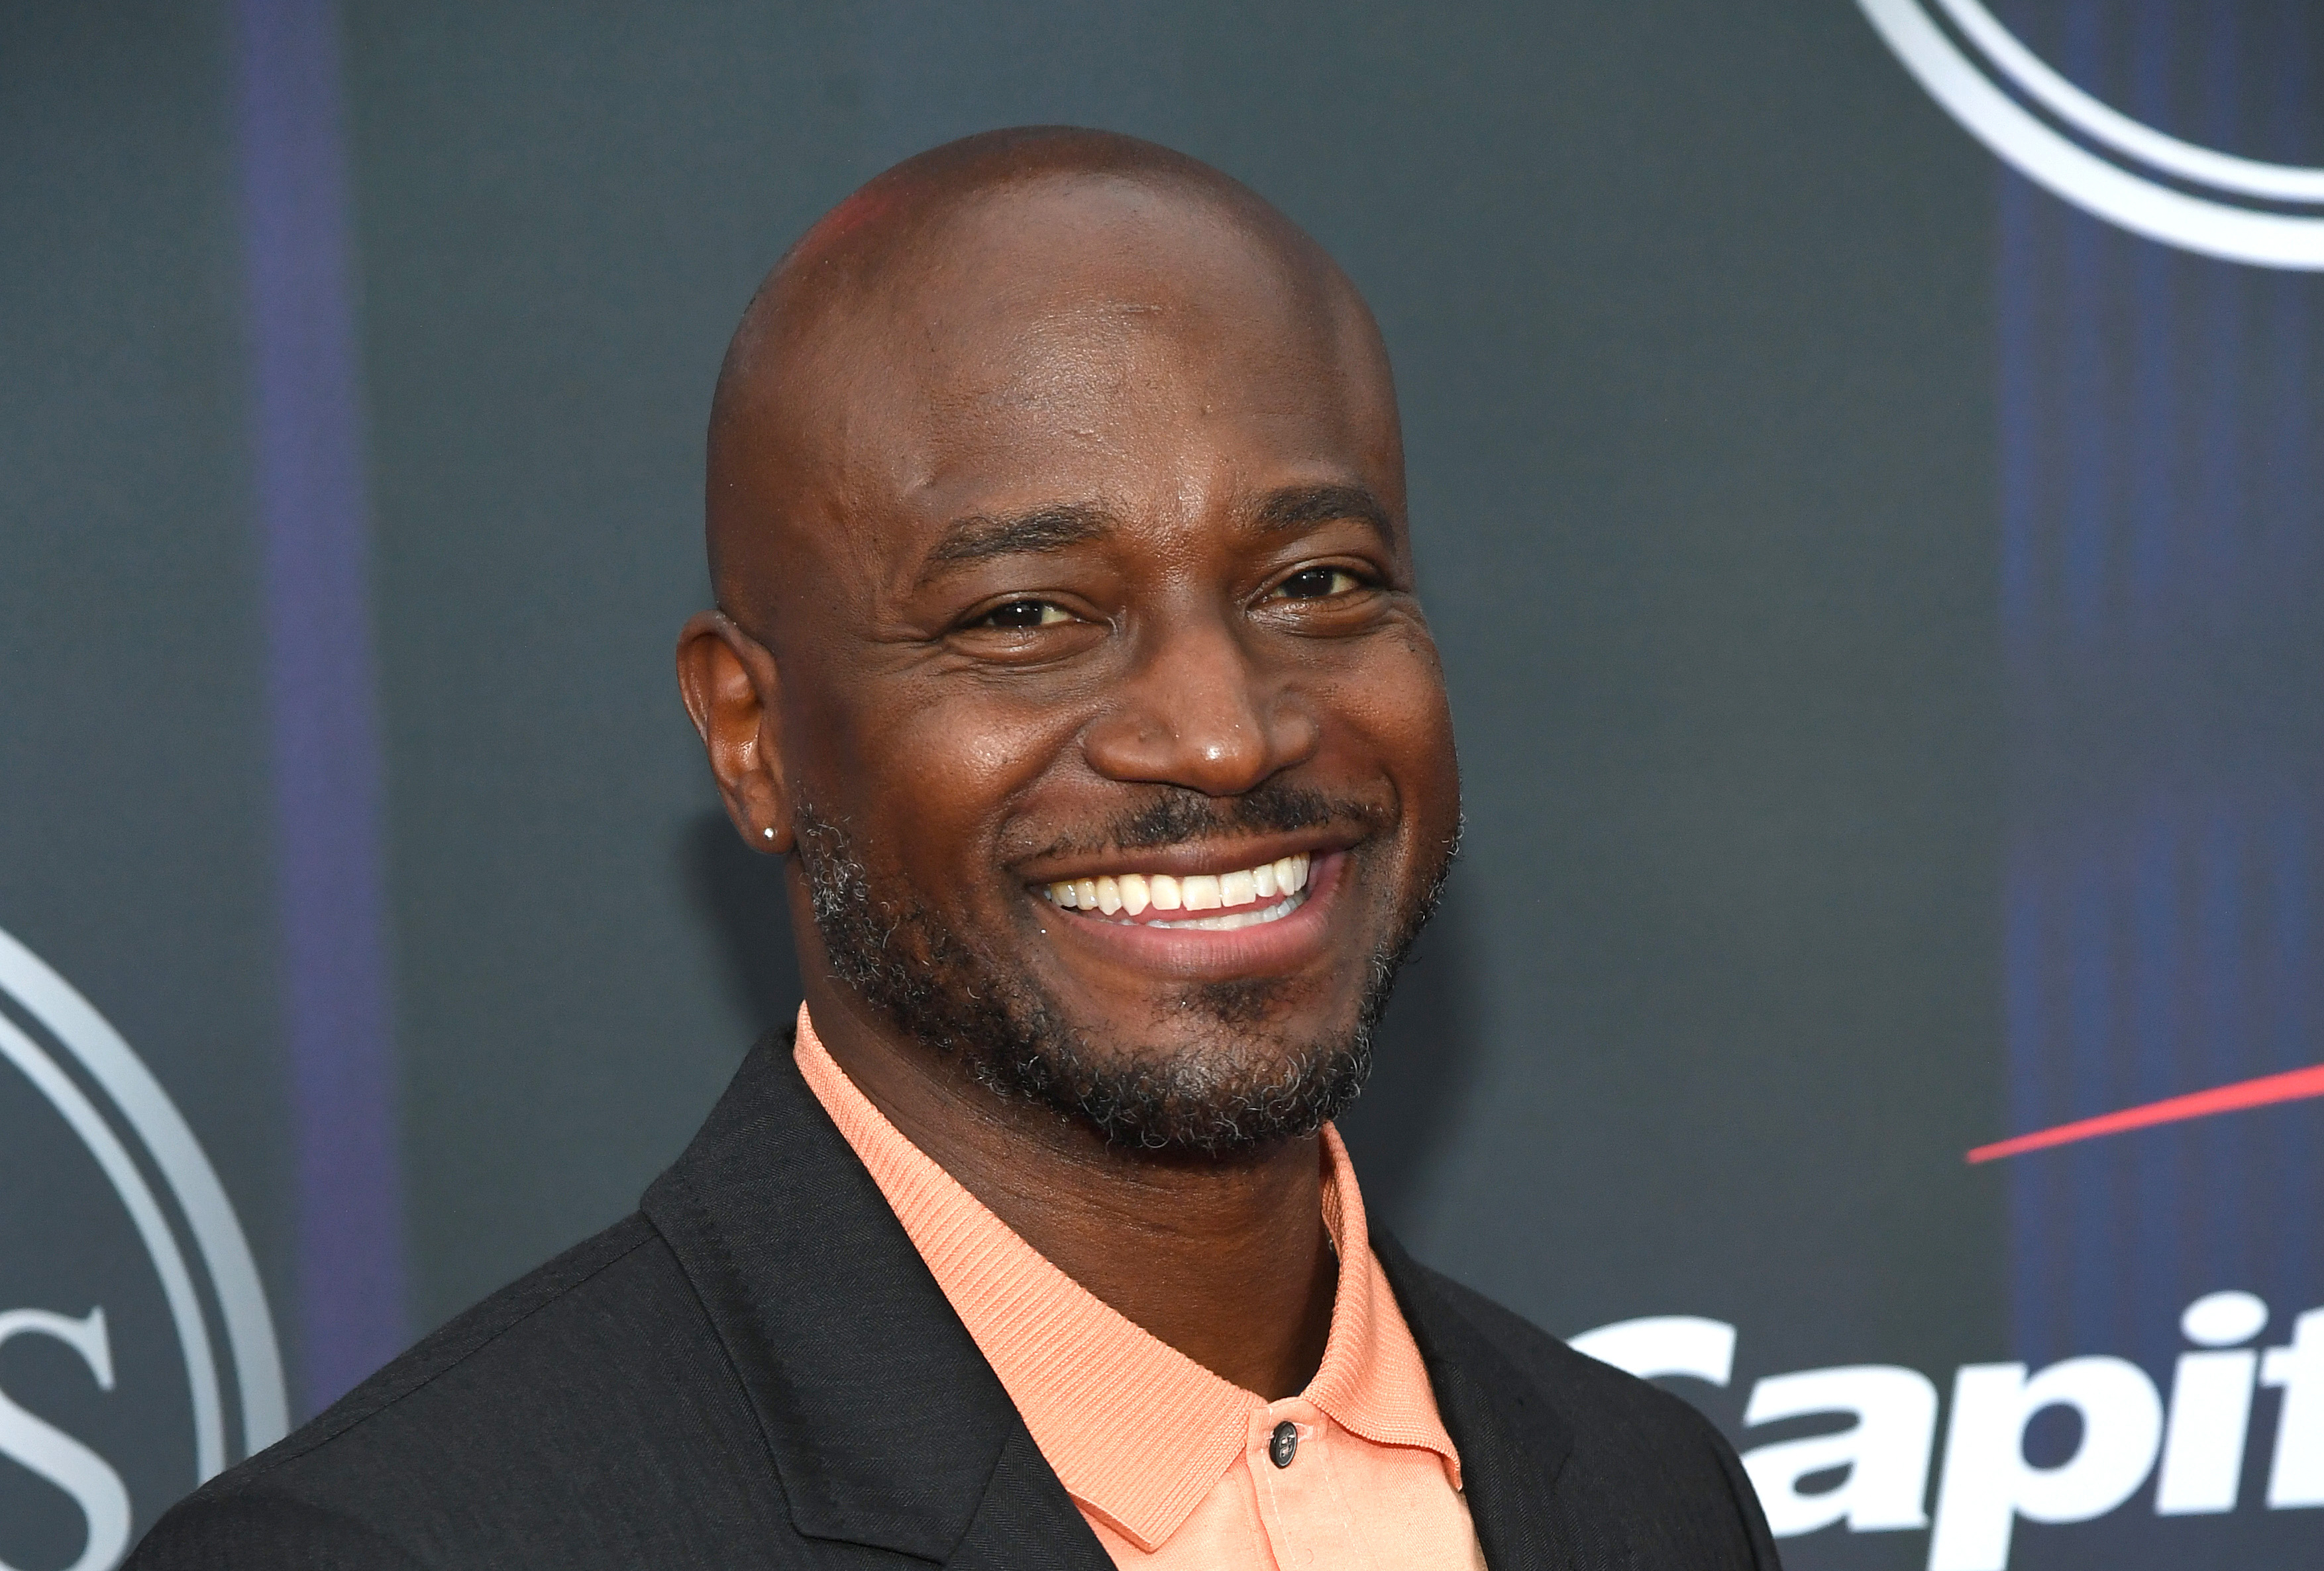 SU alum Taye Diggs surprises Rochester school with donation of more than $7...